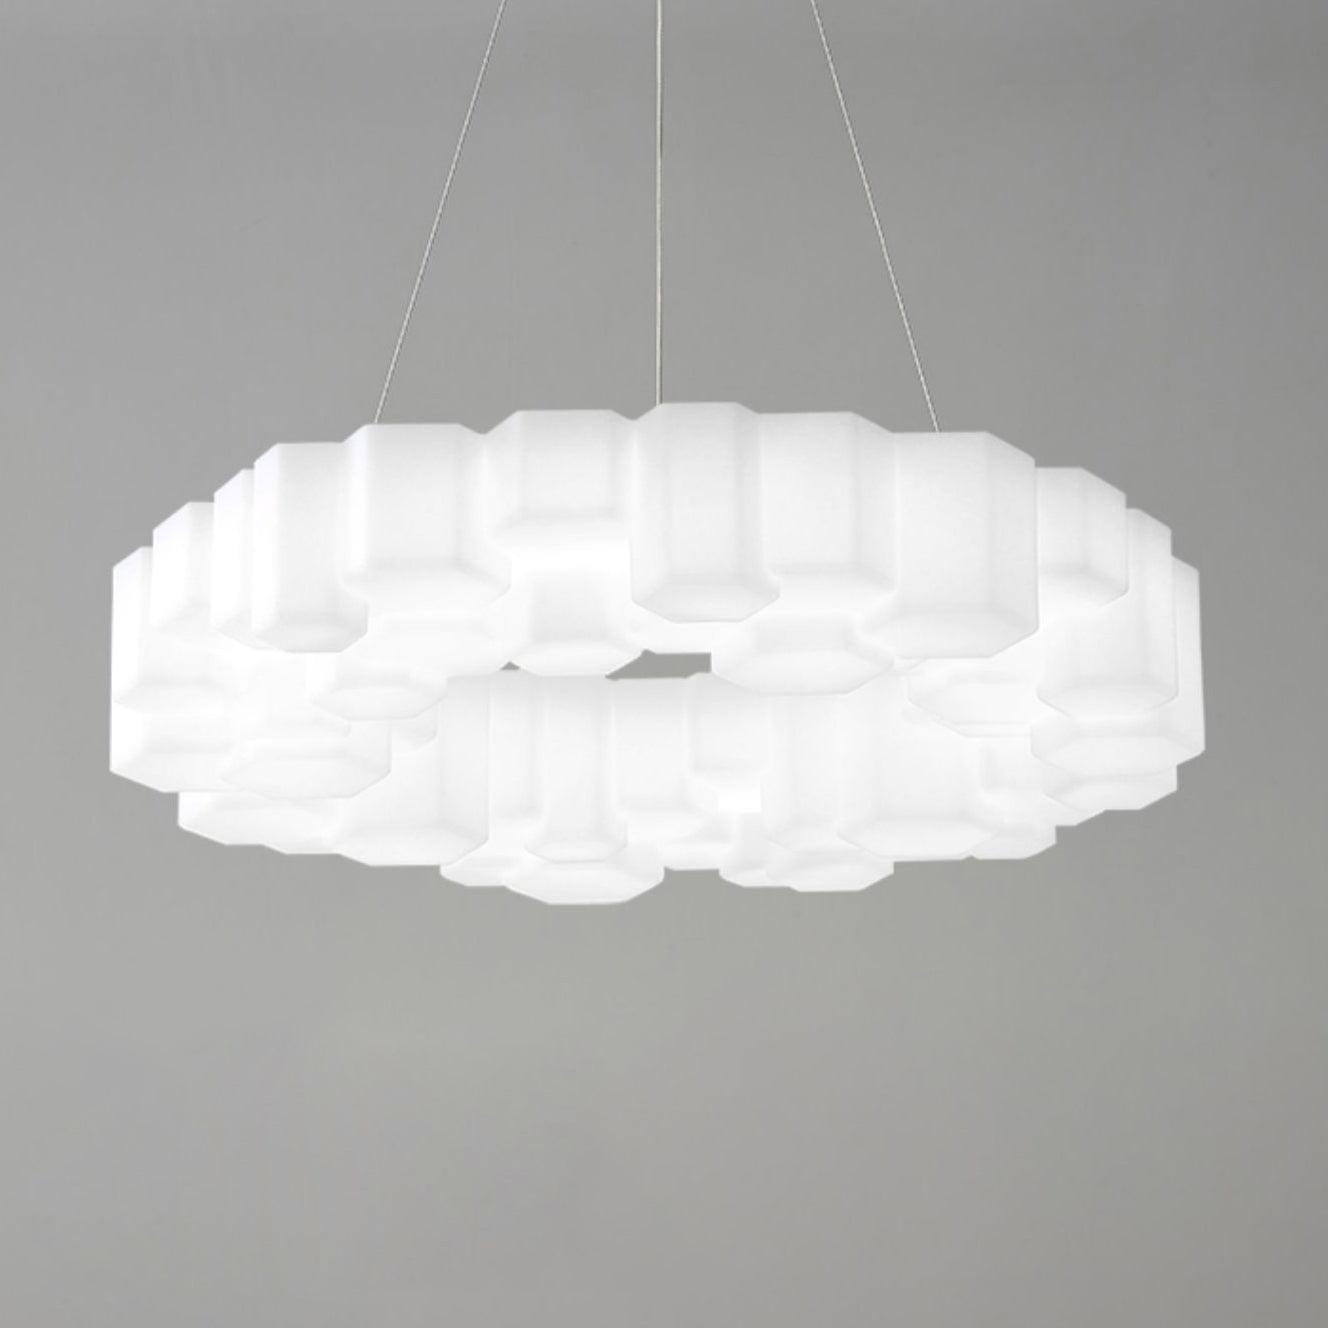 Cool White White Honeycomb Chandelier - Size: 26.7" in Diameter, 5.9" in Height (68cm x 15cm)